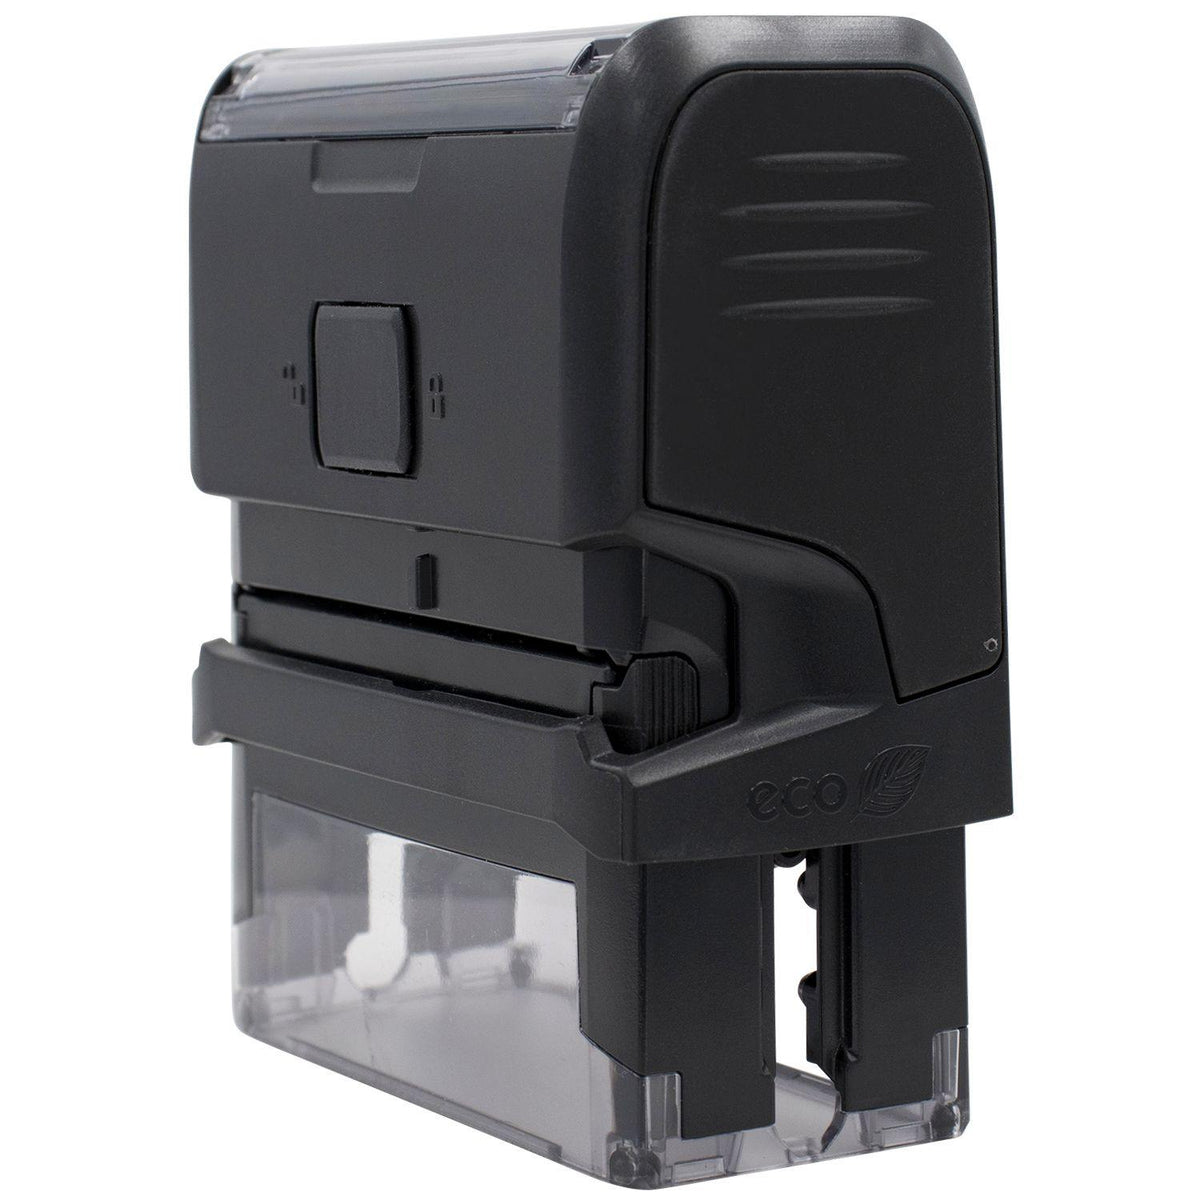 Side View of Large Self Inking Cod Office Stamp at an Angle